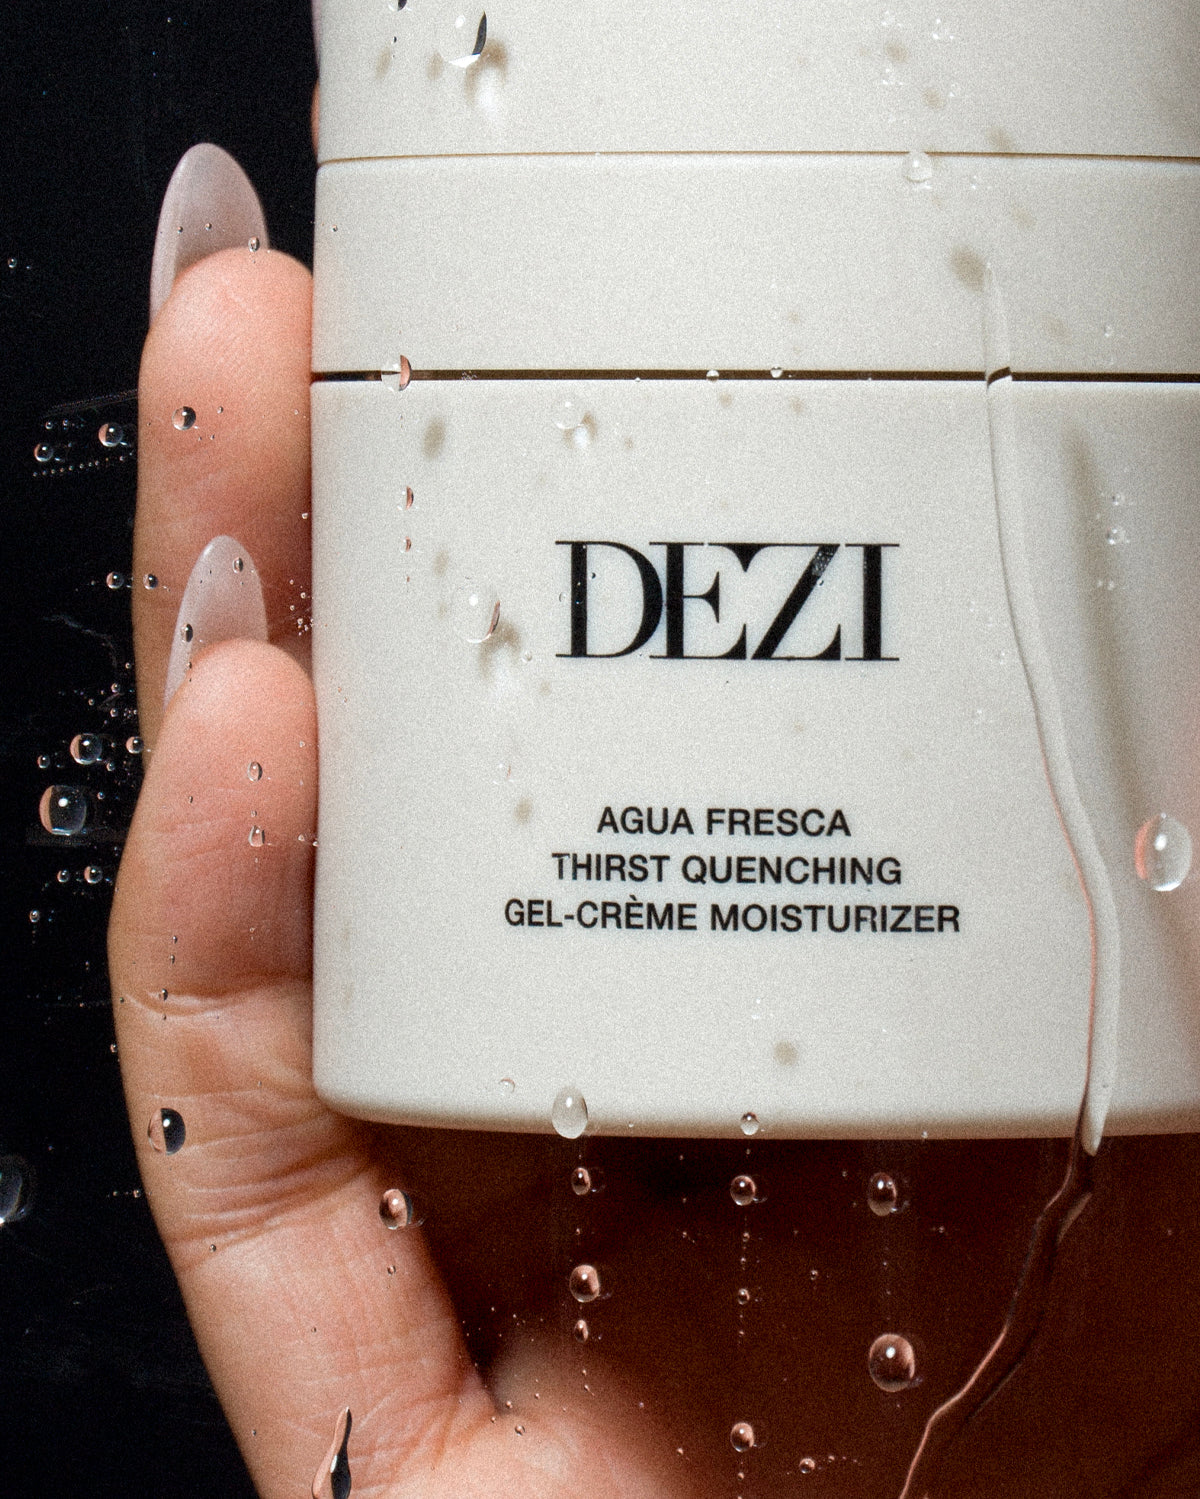 This shows the moisturizer jar being held in a hand. The cap is on it and it has water droplets. You can see that the product must be very hydrating. 